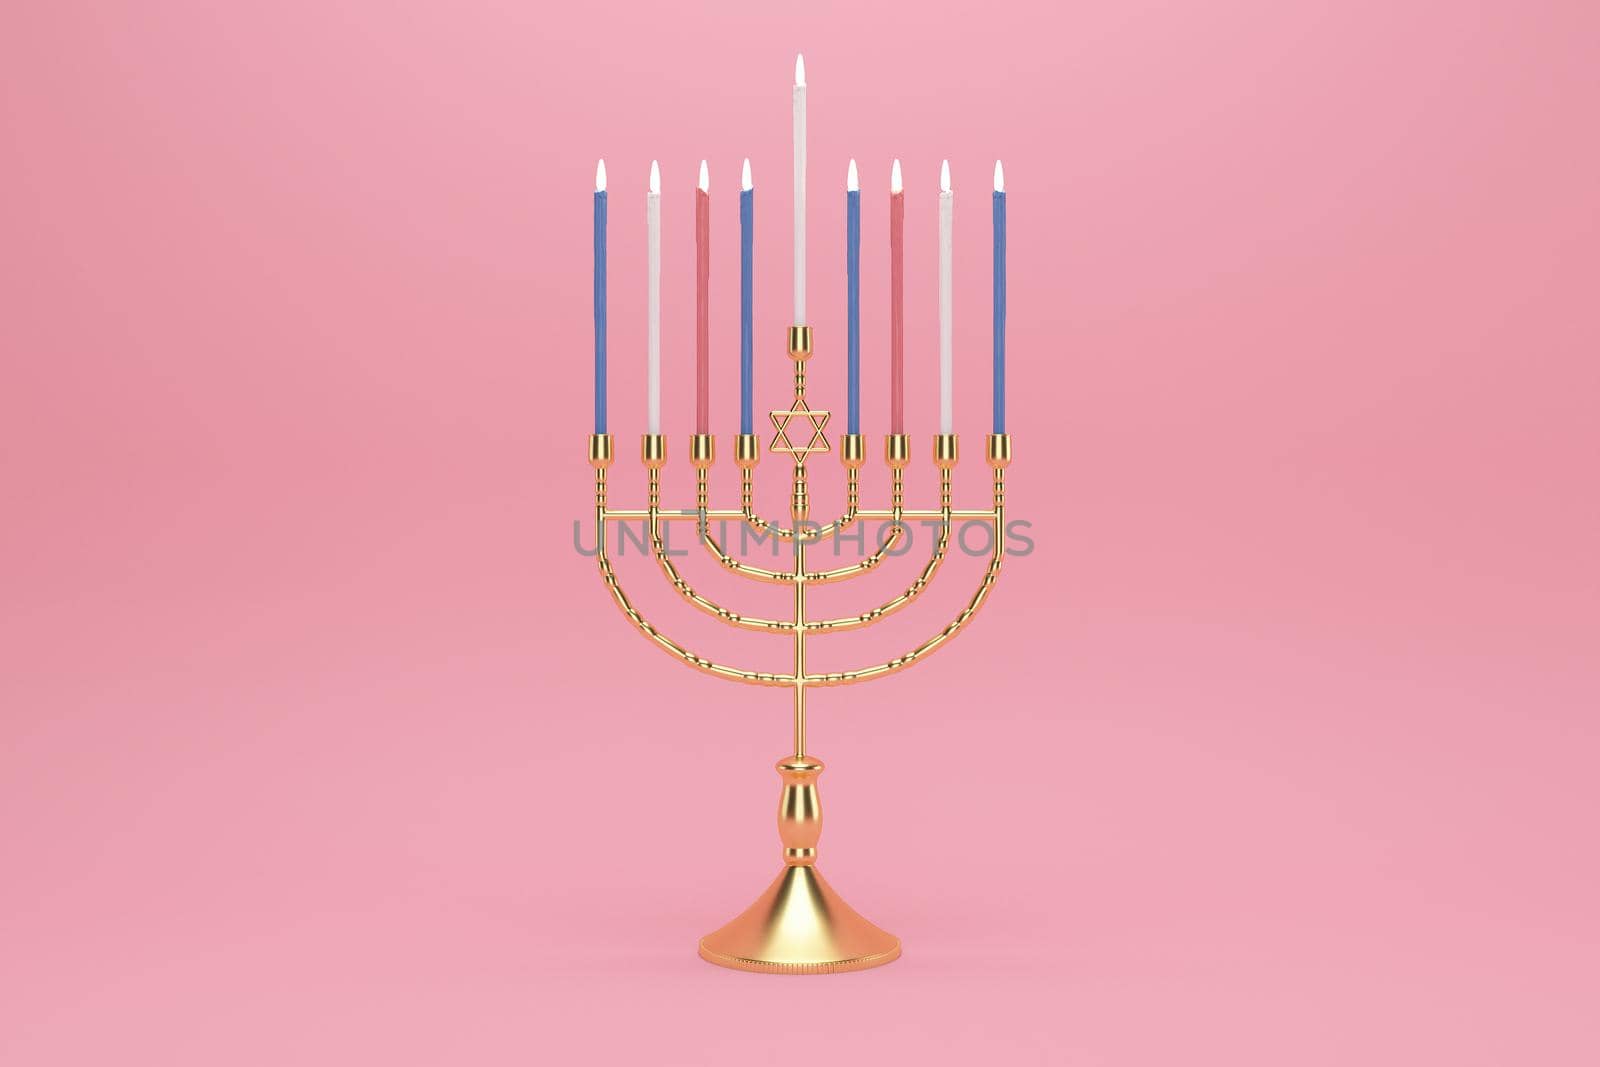 3d rendering Image of Jewish holiday Hanukkah with menorah or traditional Candelabra on a  pink background. by put3d